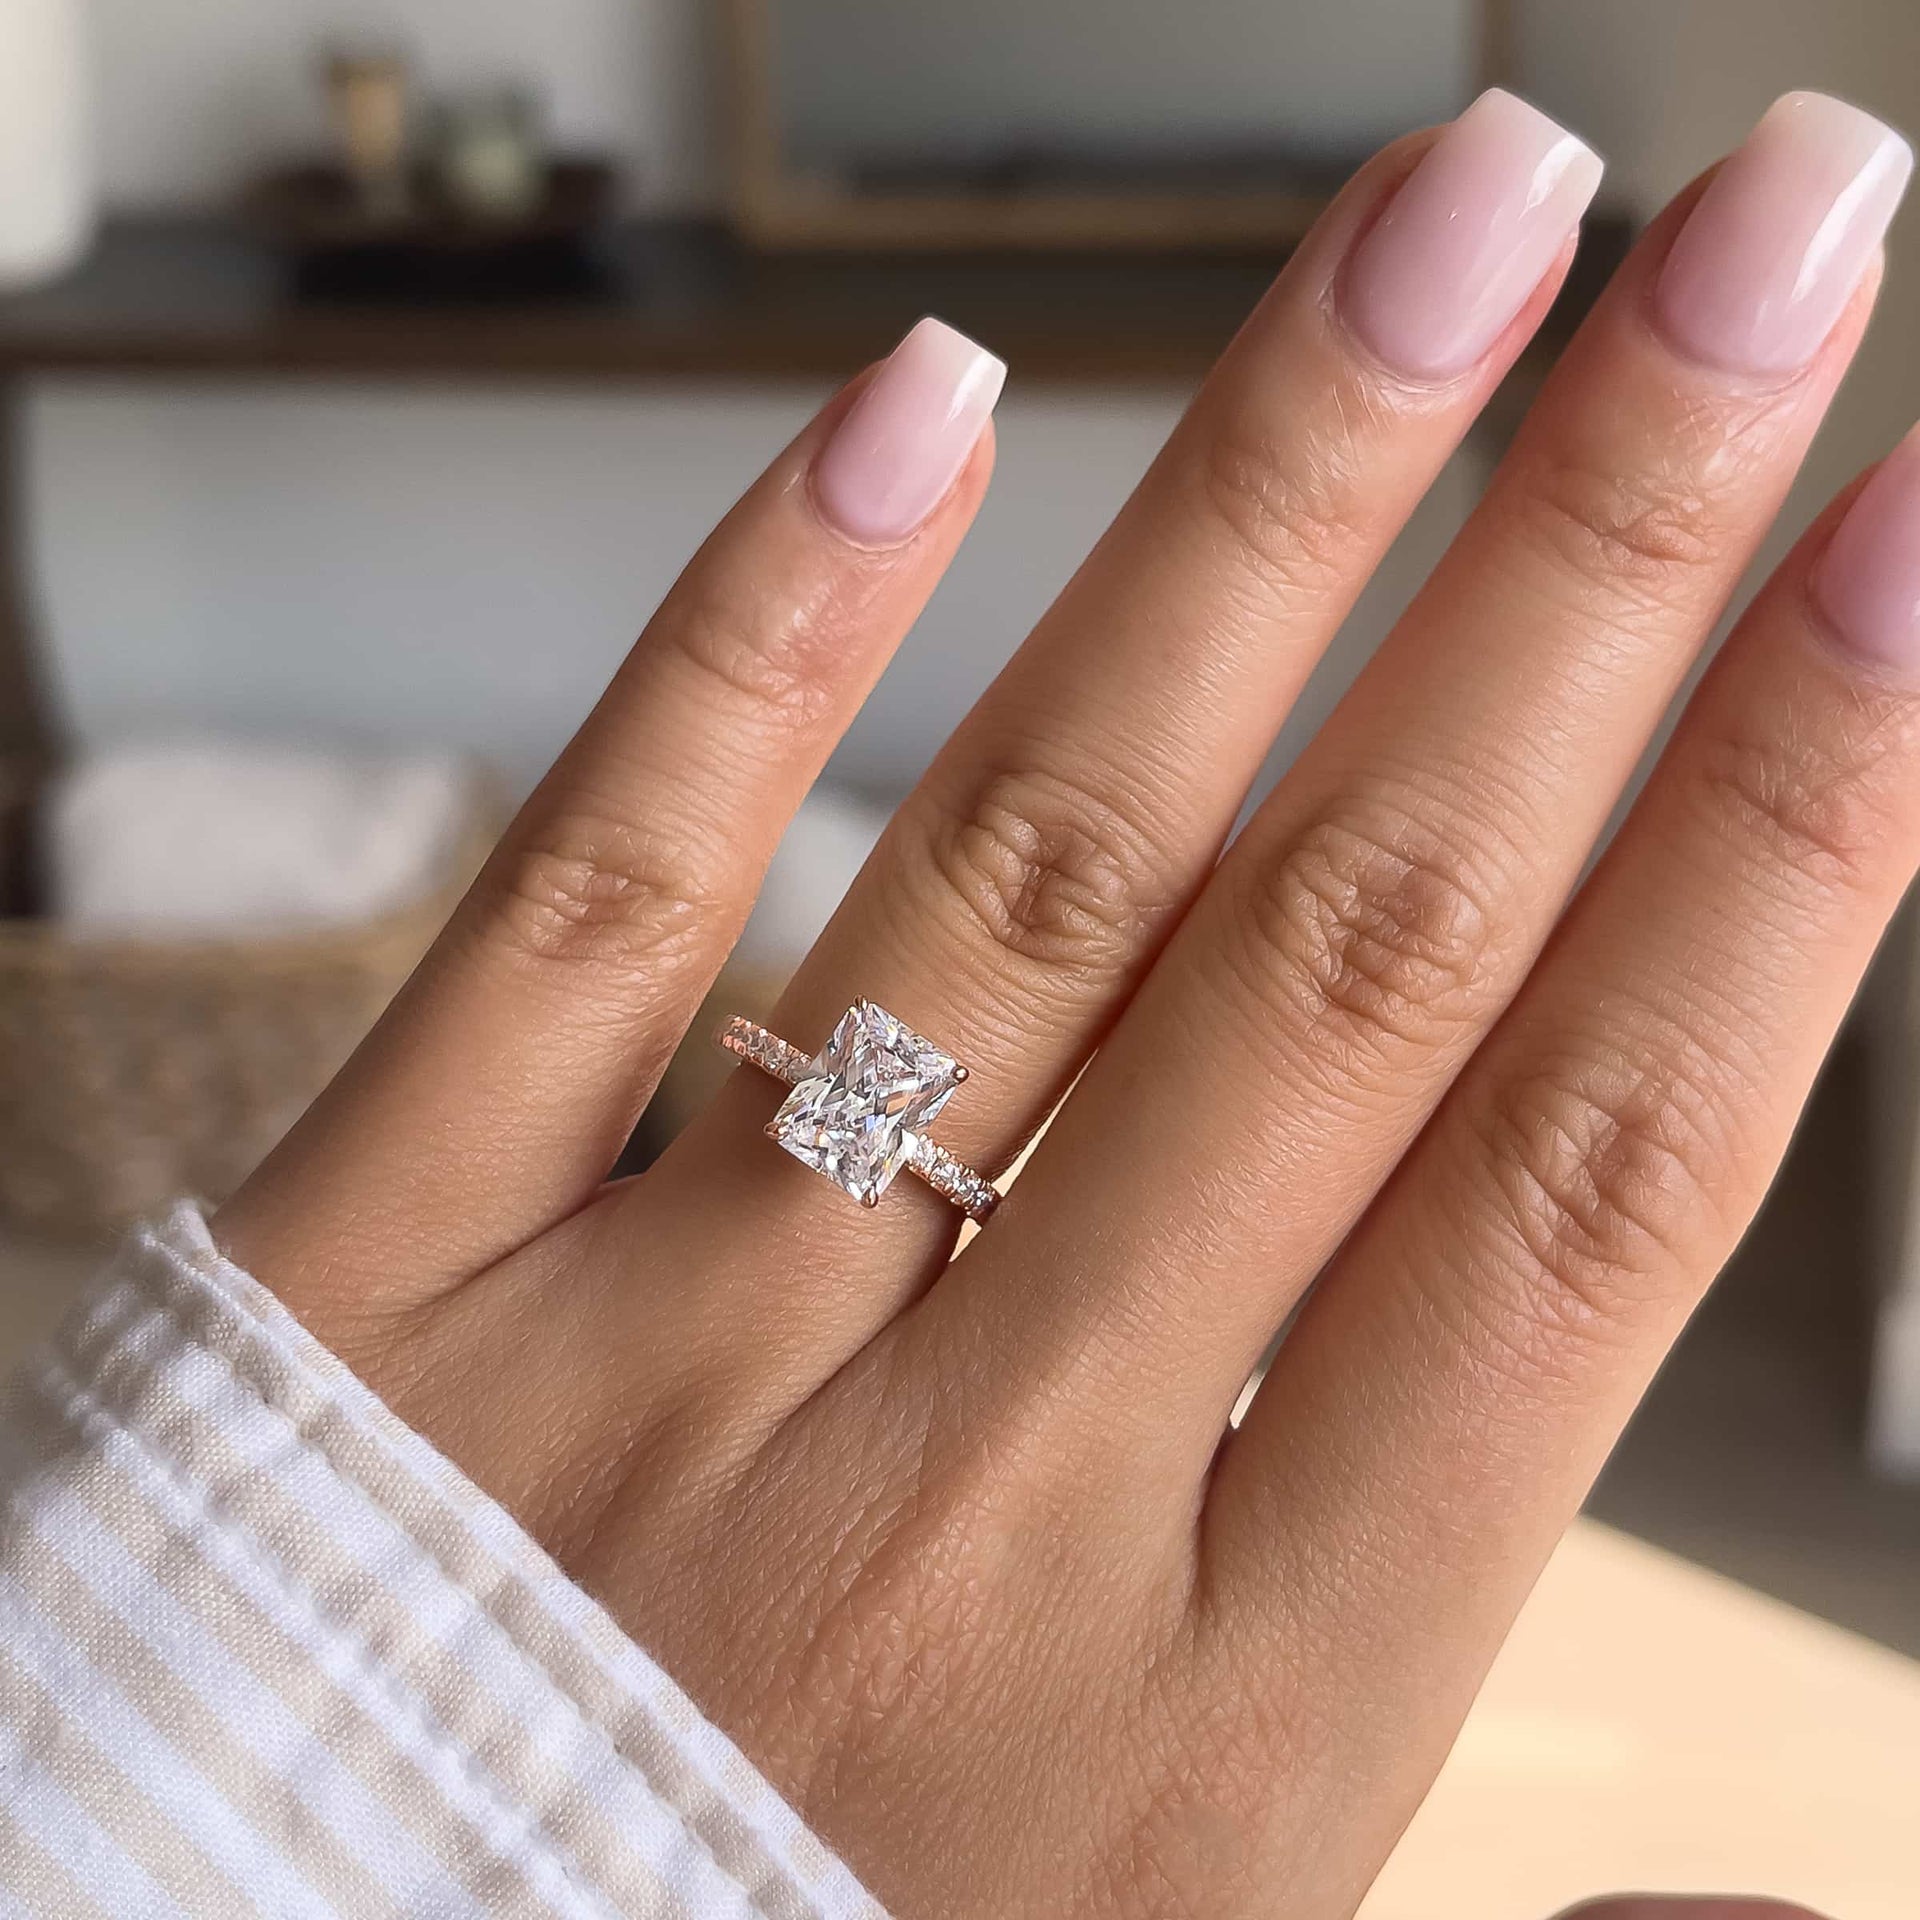 3 carat engagement ring shown in rose gold on female hand with light pink nails and a striped top with a neutral toned background